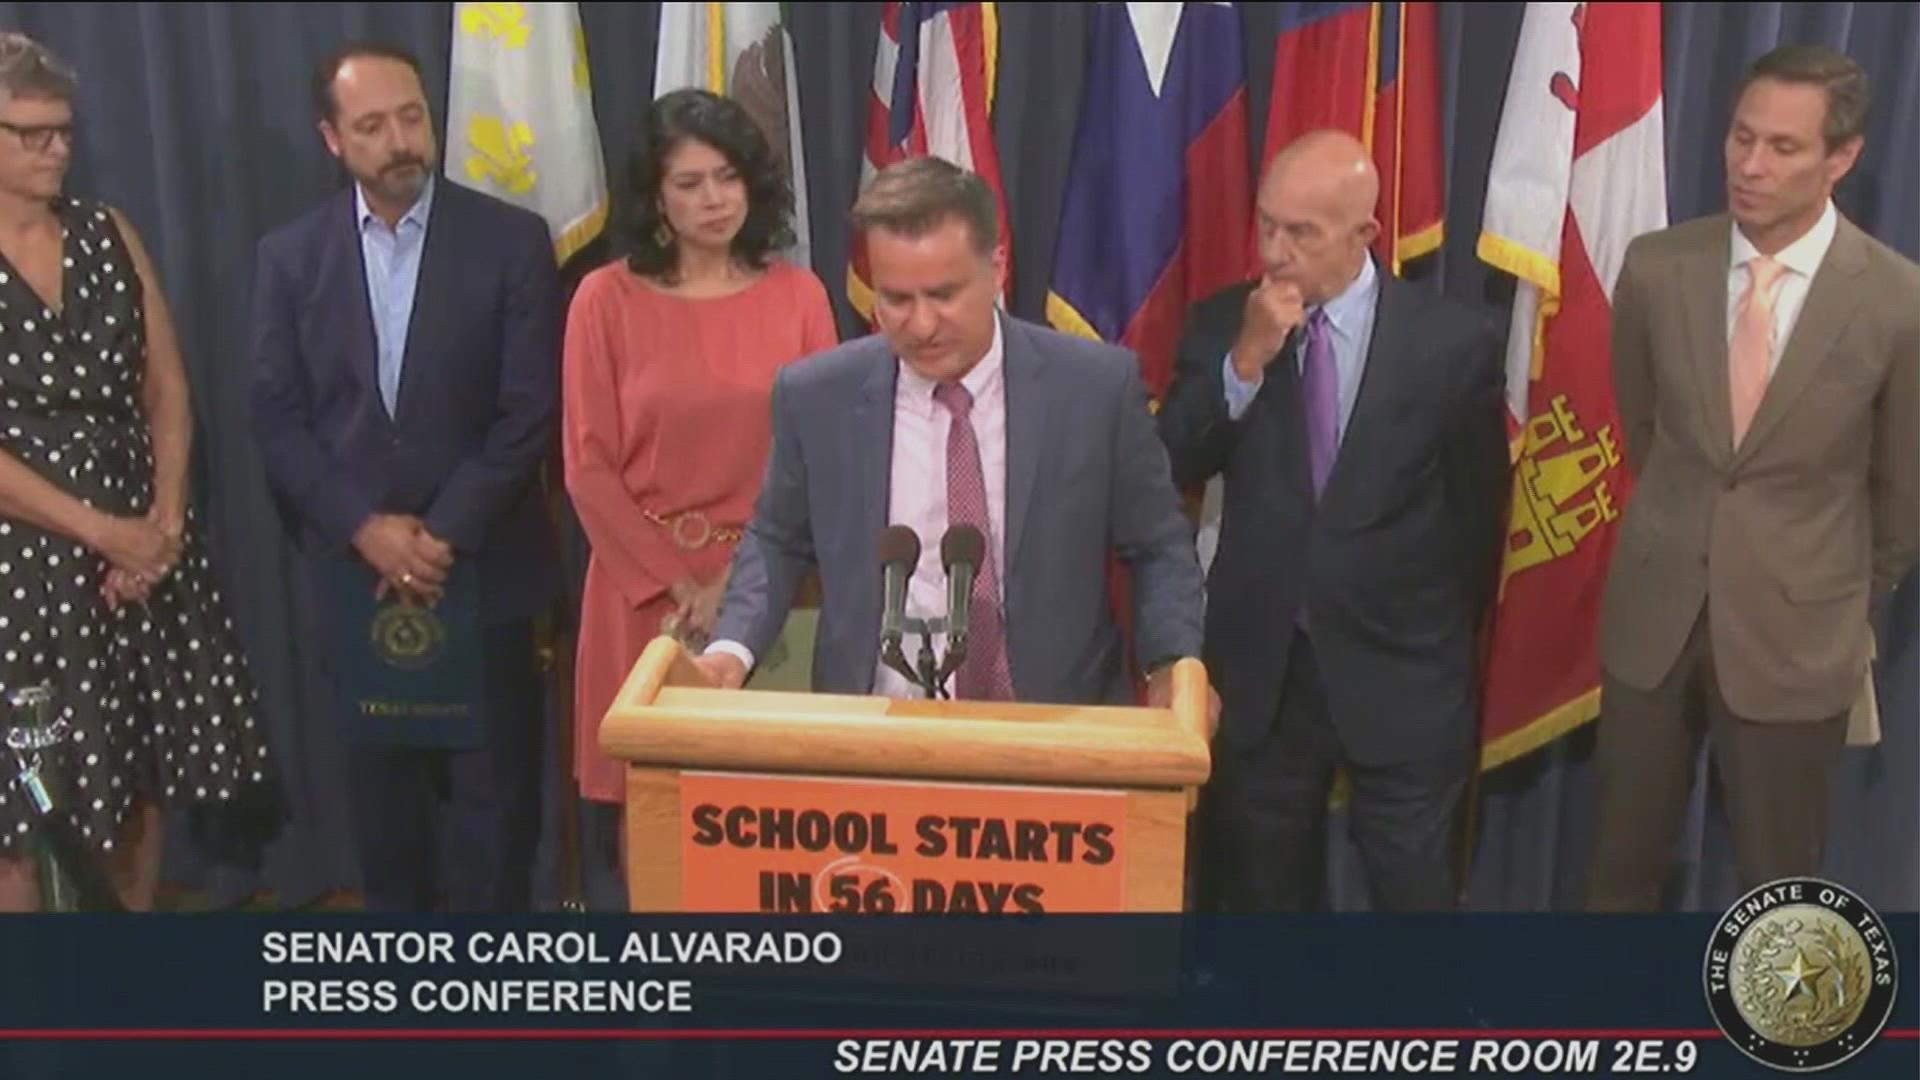 Democratic state lawmakers are still calling on their colleagues across the aisle to do more to address gun crime and school safety.